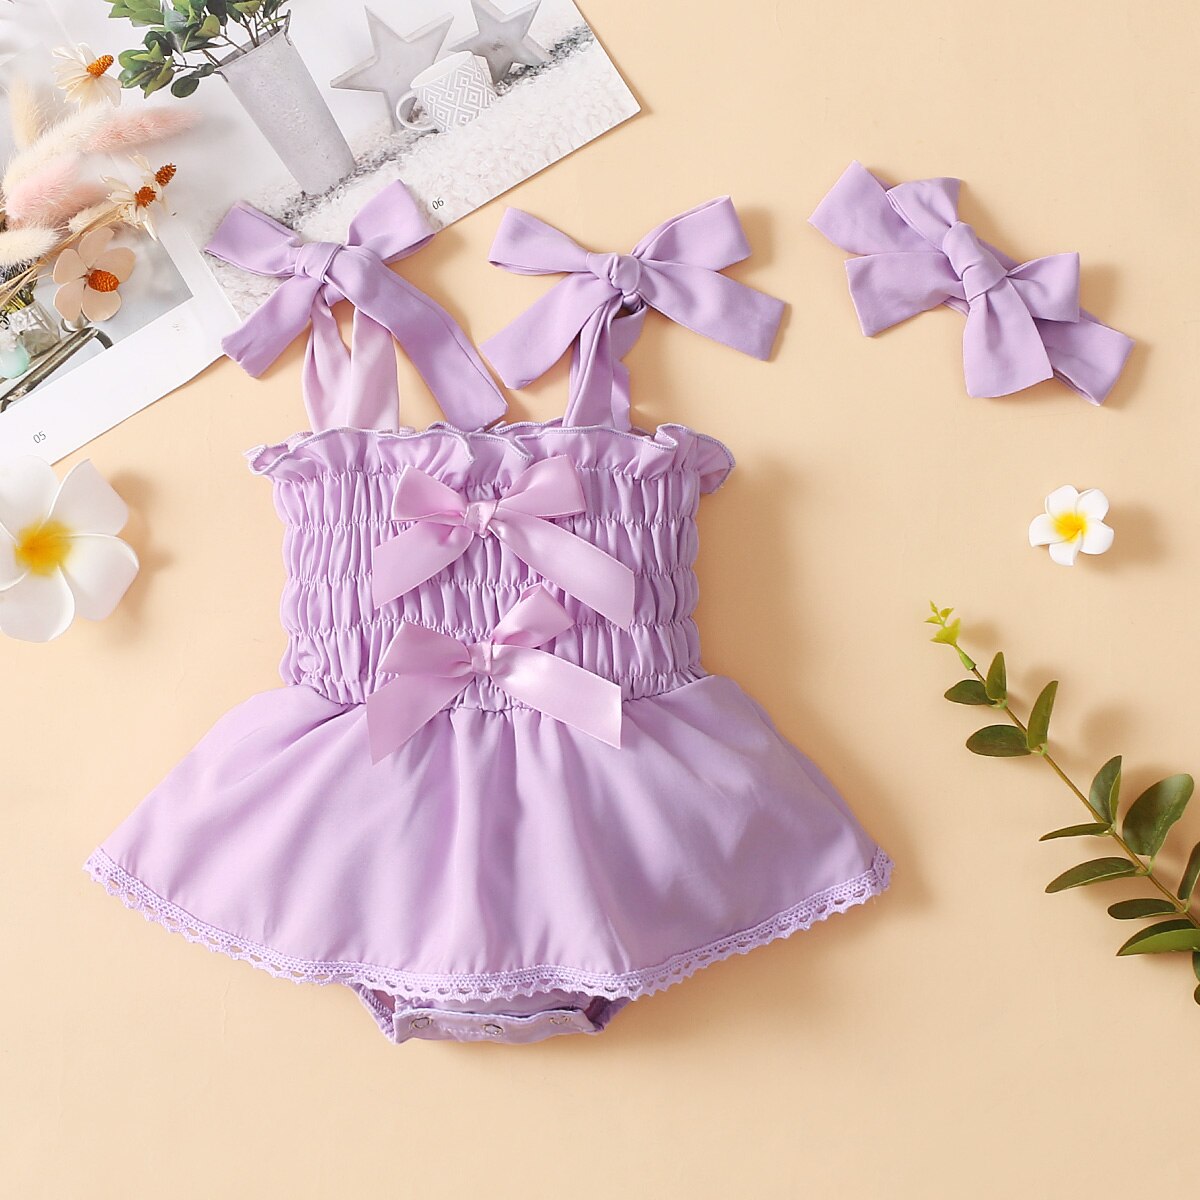 Infant-Newborn-Baby-Girls-Bodysuits-Dress-Elastic-Solid-Bowknot-Strap-Jumpsuit-Summer-Outfits-Tutu-Outfits-With-3